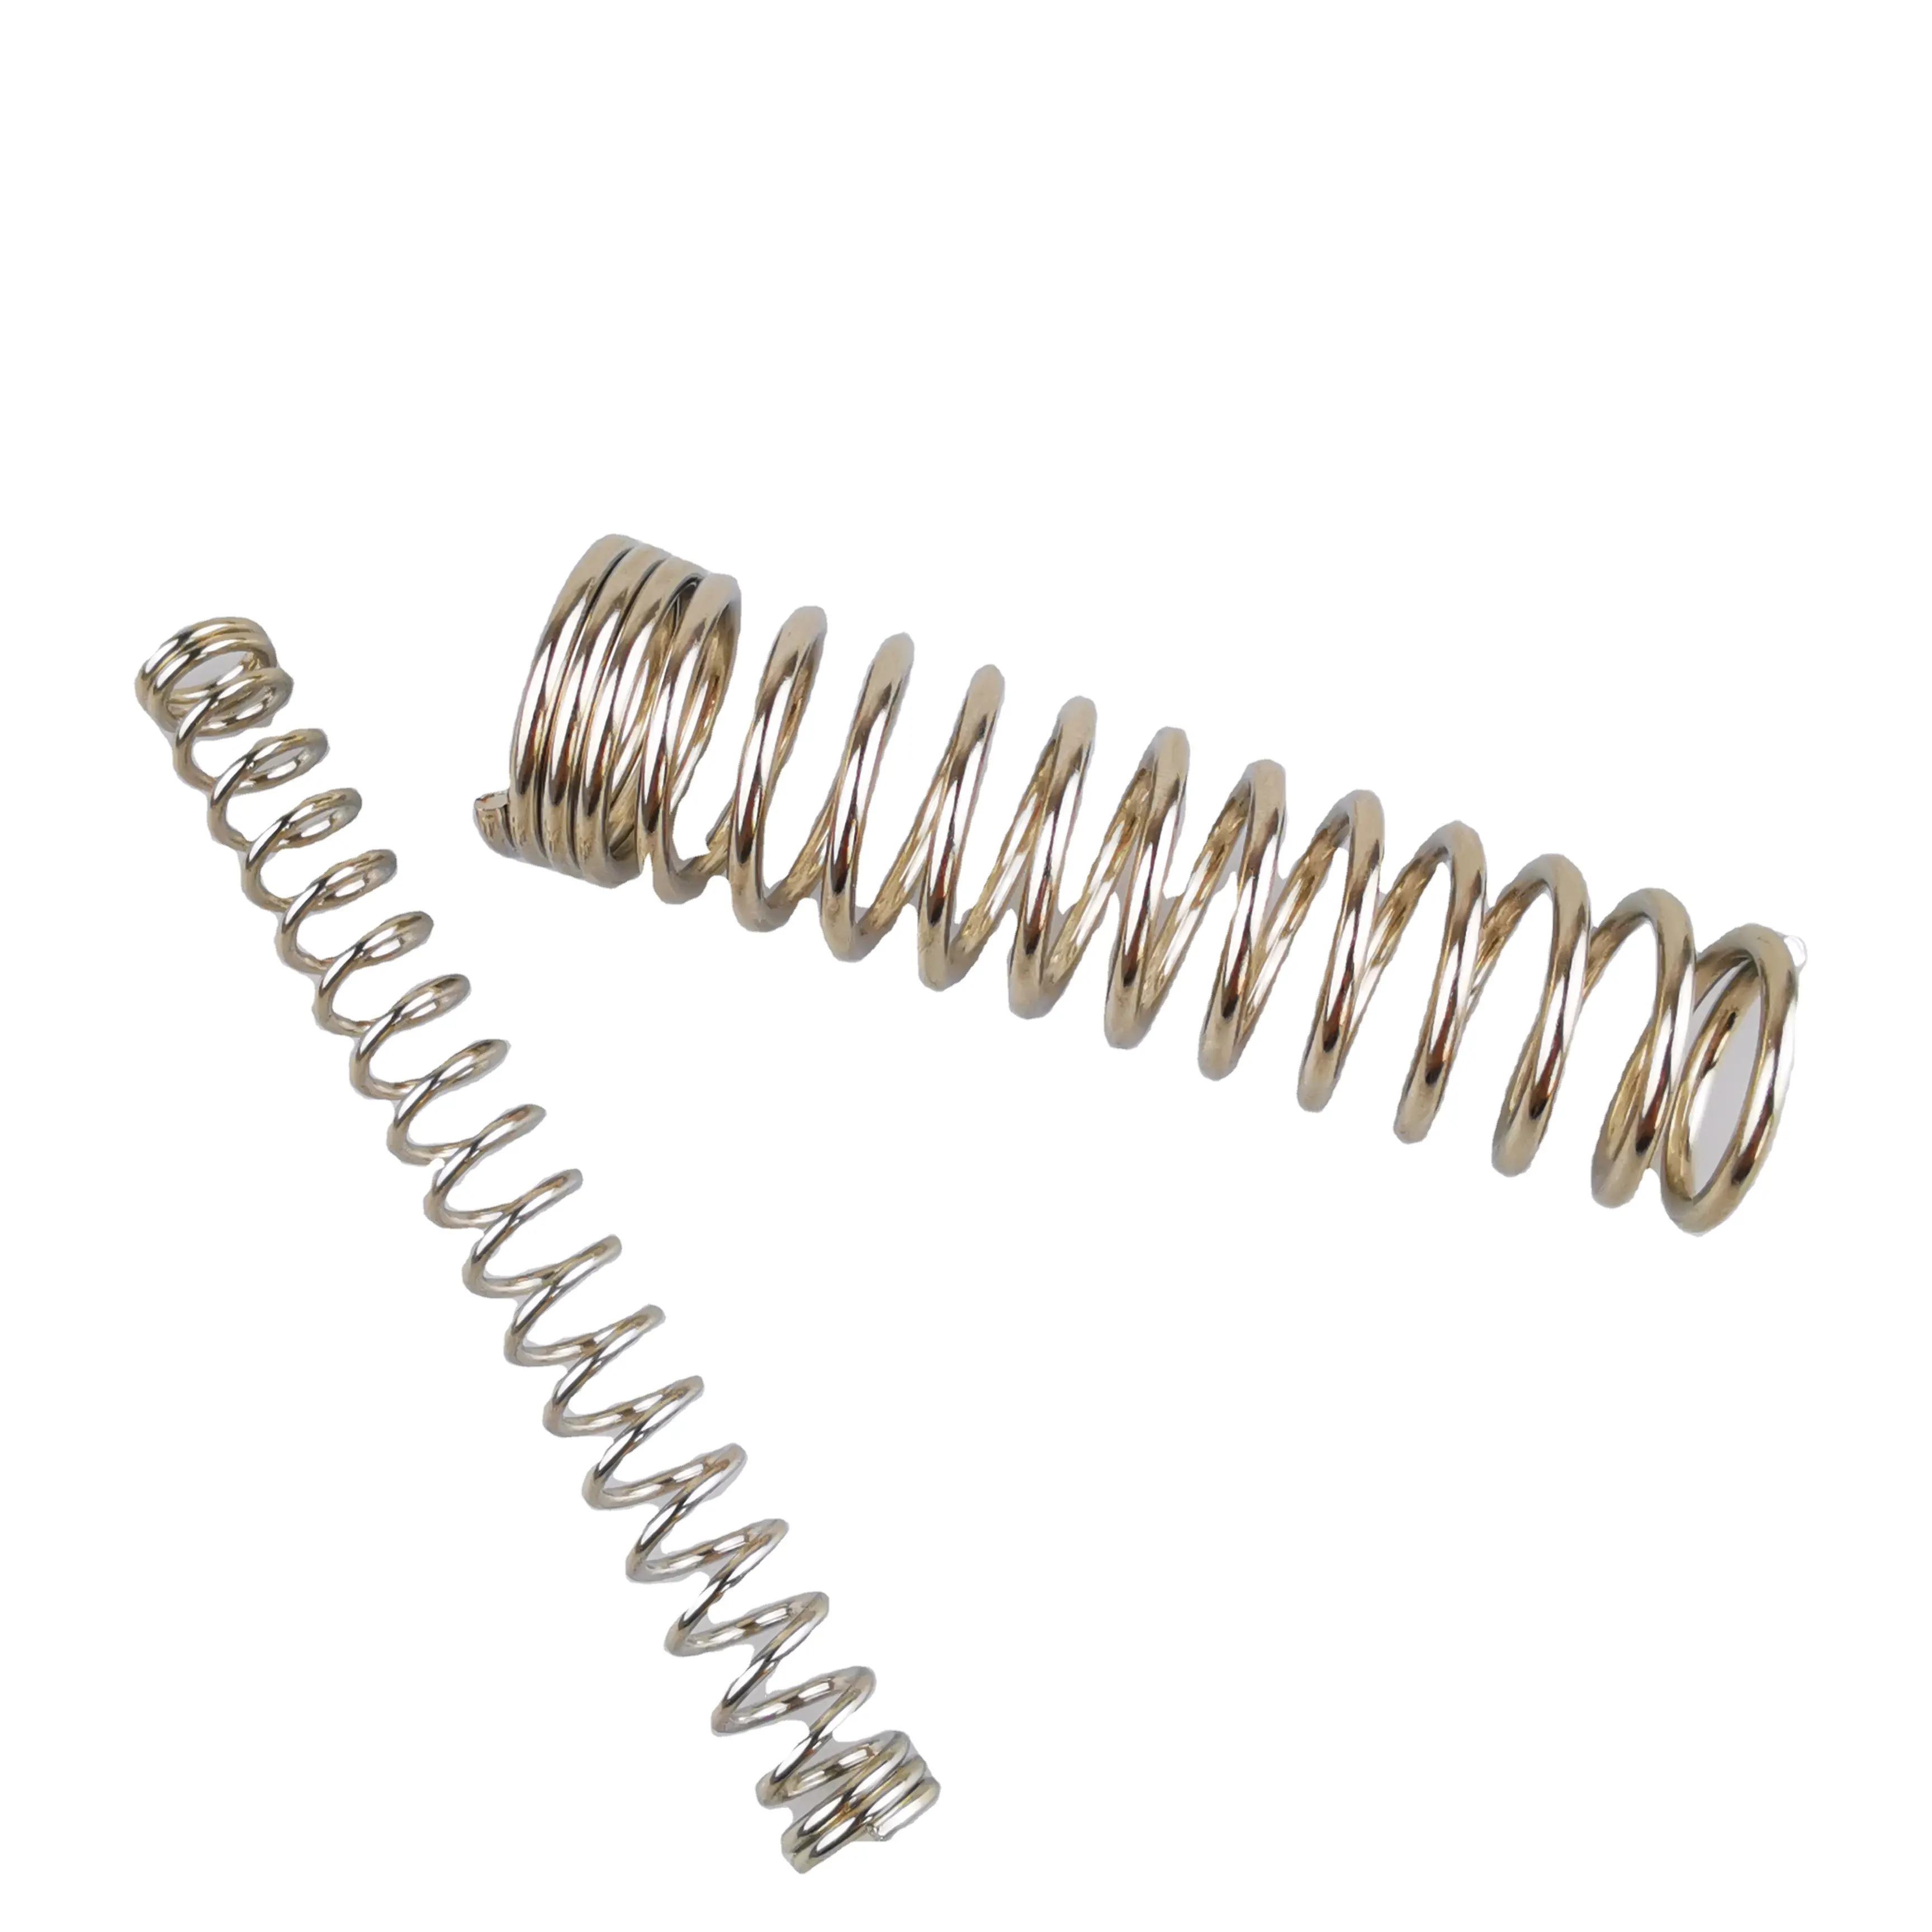 Thin 0.8mm Steel Wire Umbrella Coiled Compression Spring for Export